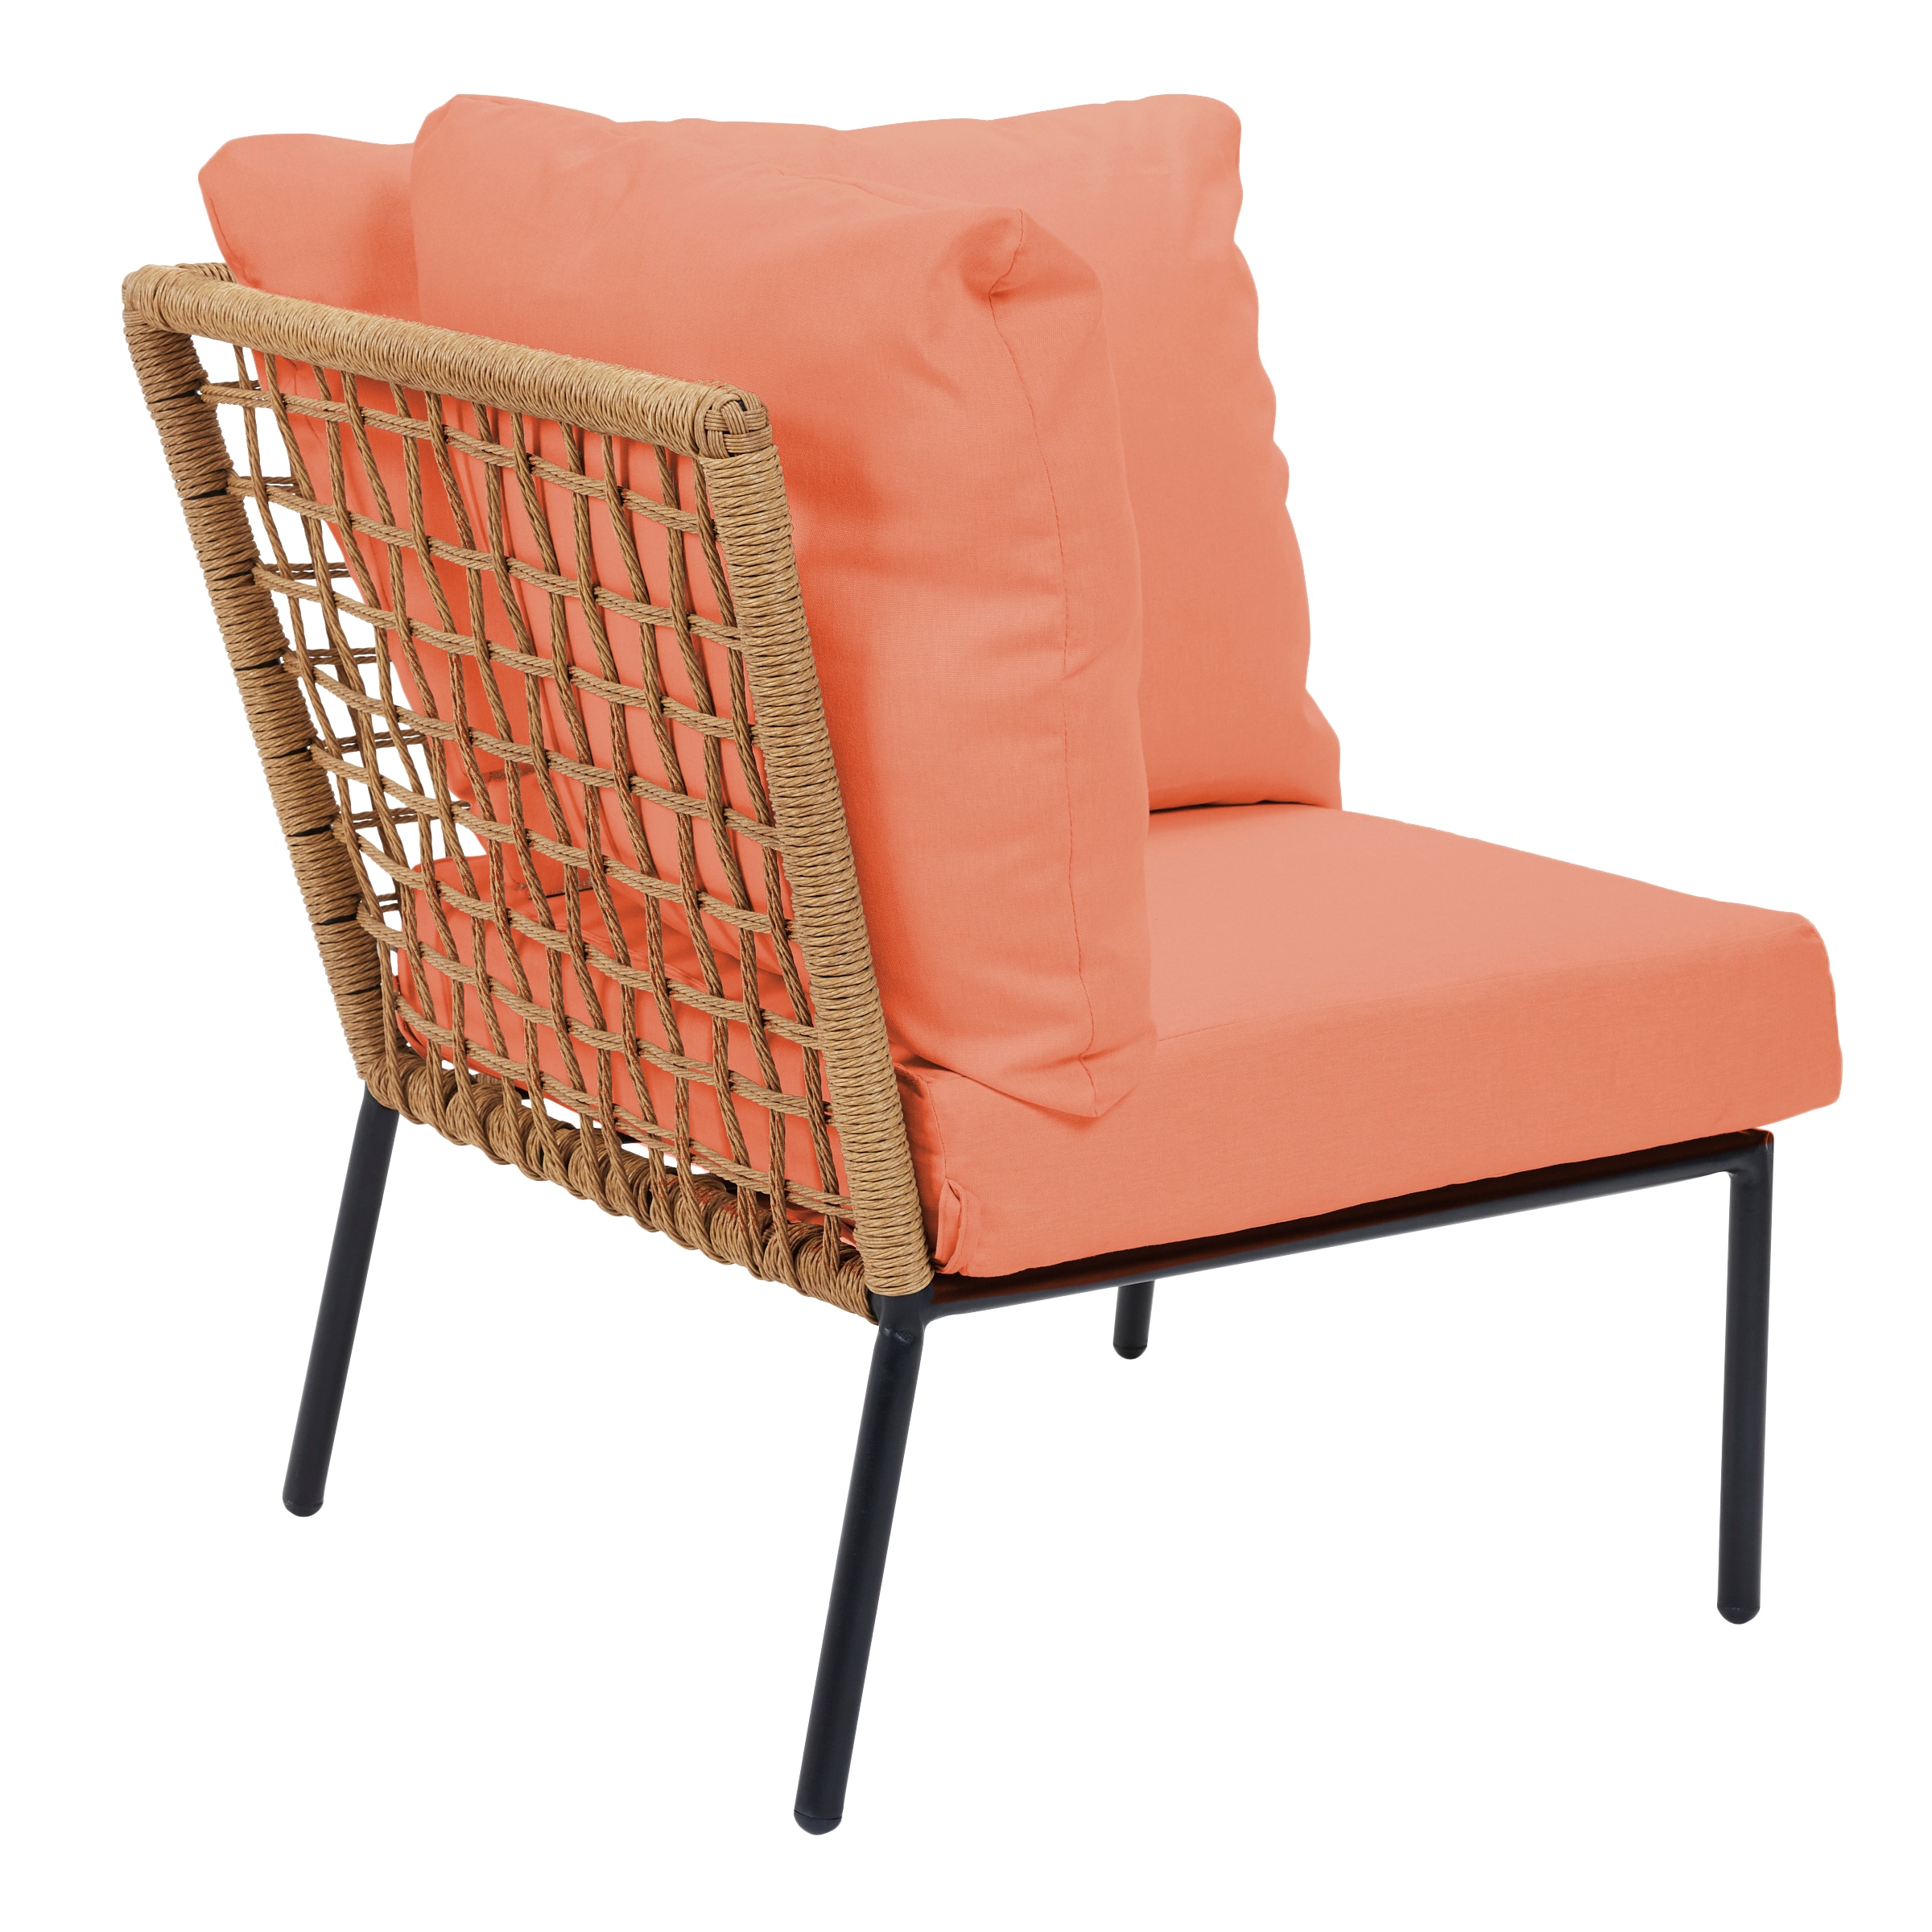 Orange Patio Wicker Set Conversation at 4-Piece in Sets Conversation Patio 21 Cushions Origin the with department Clairmont